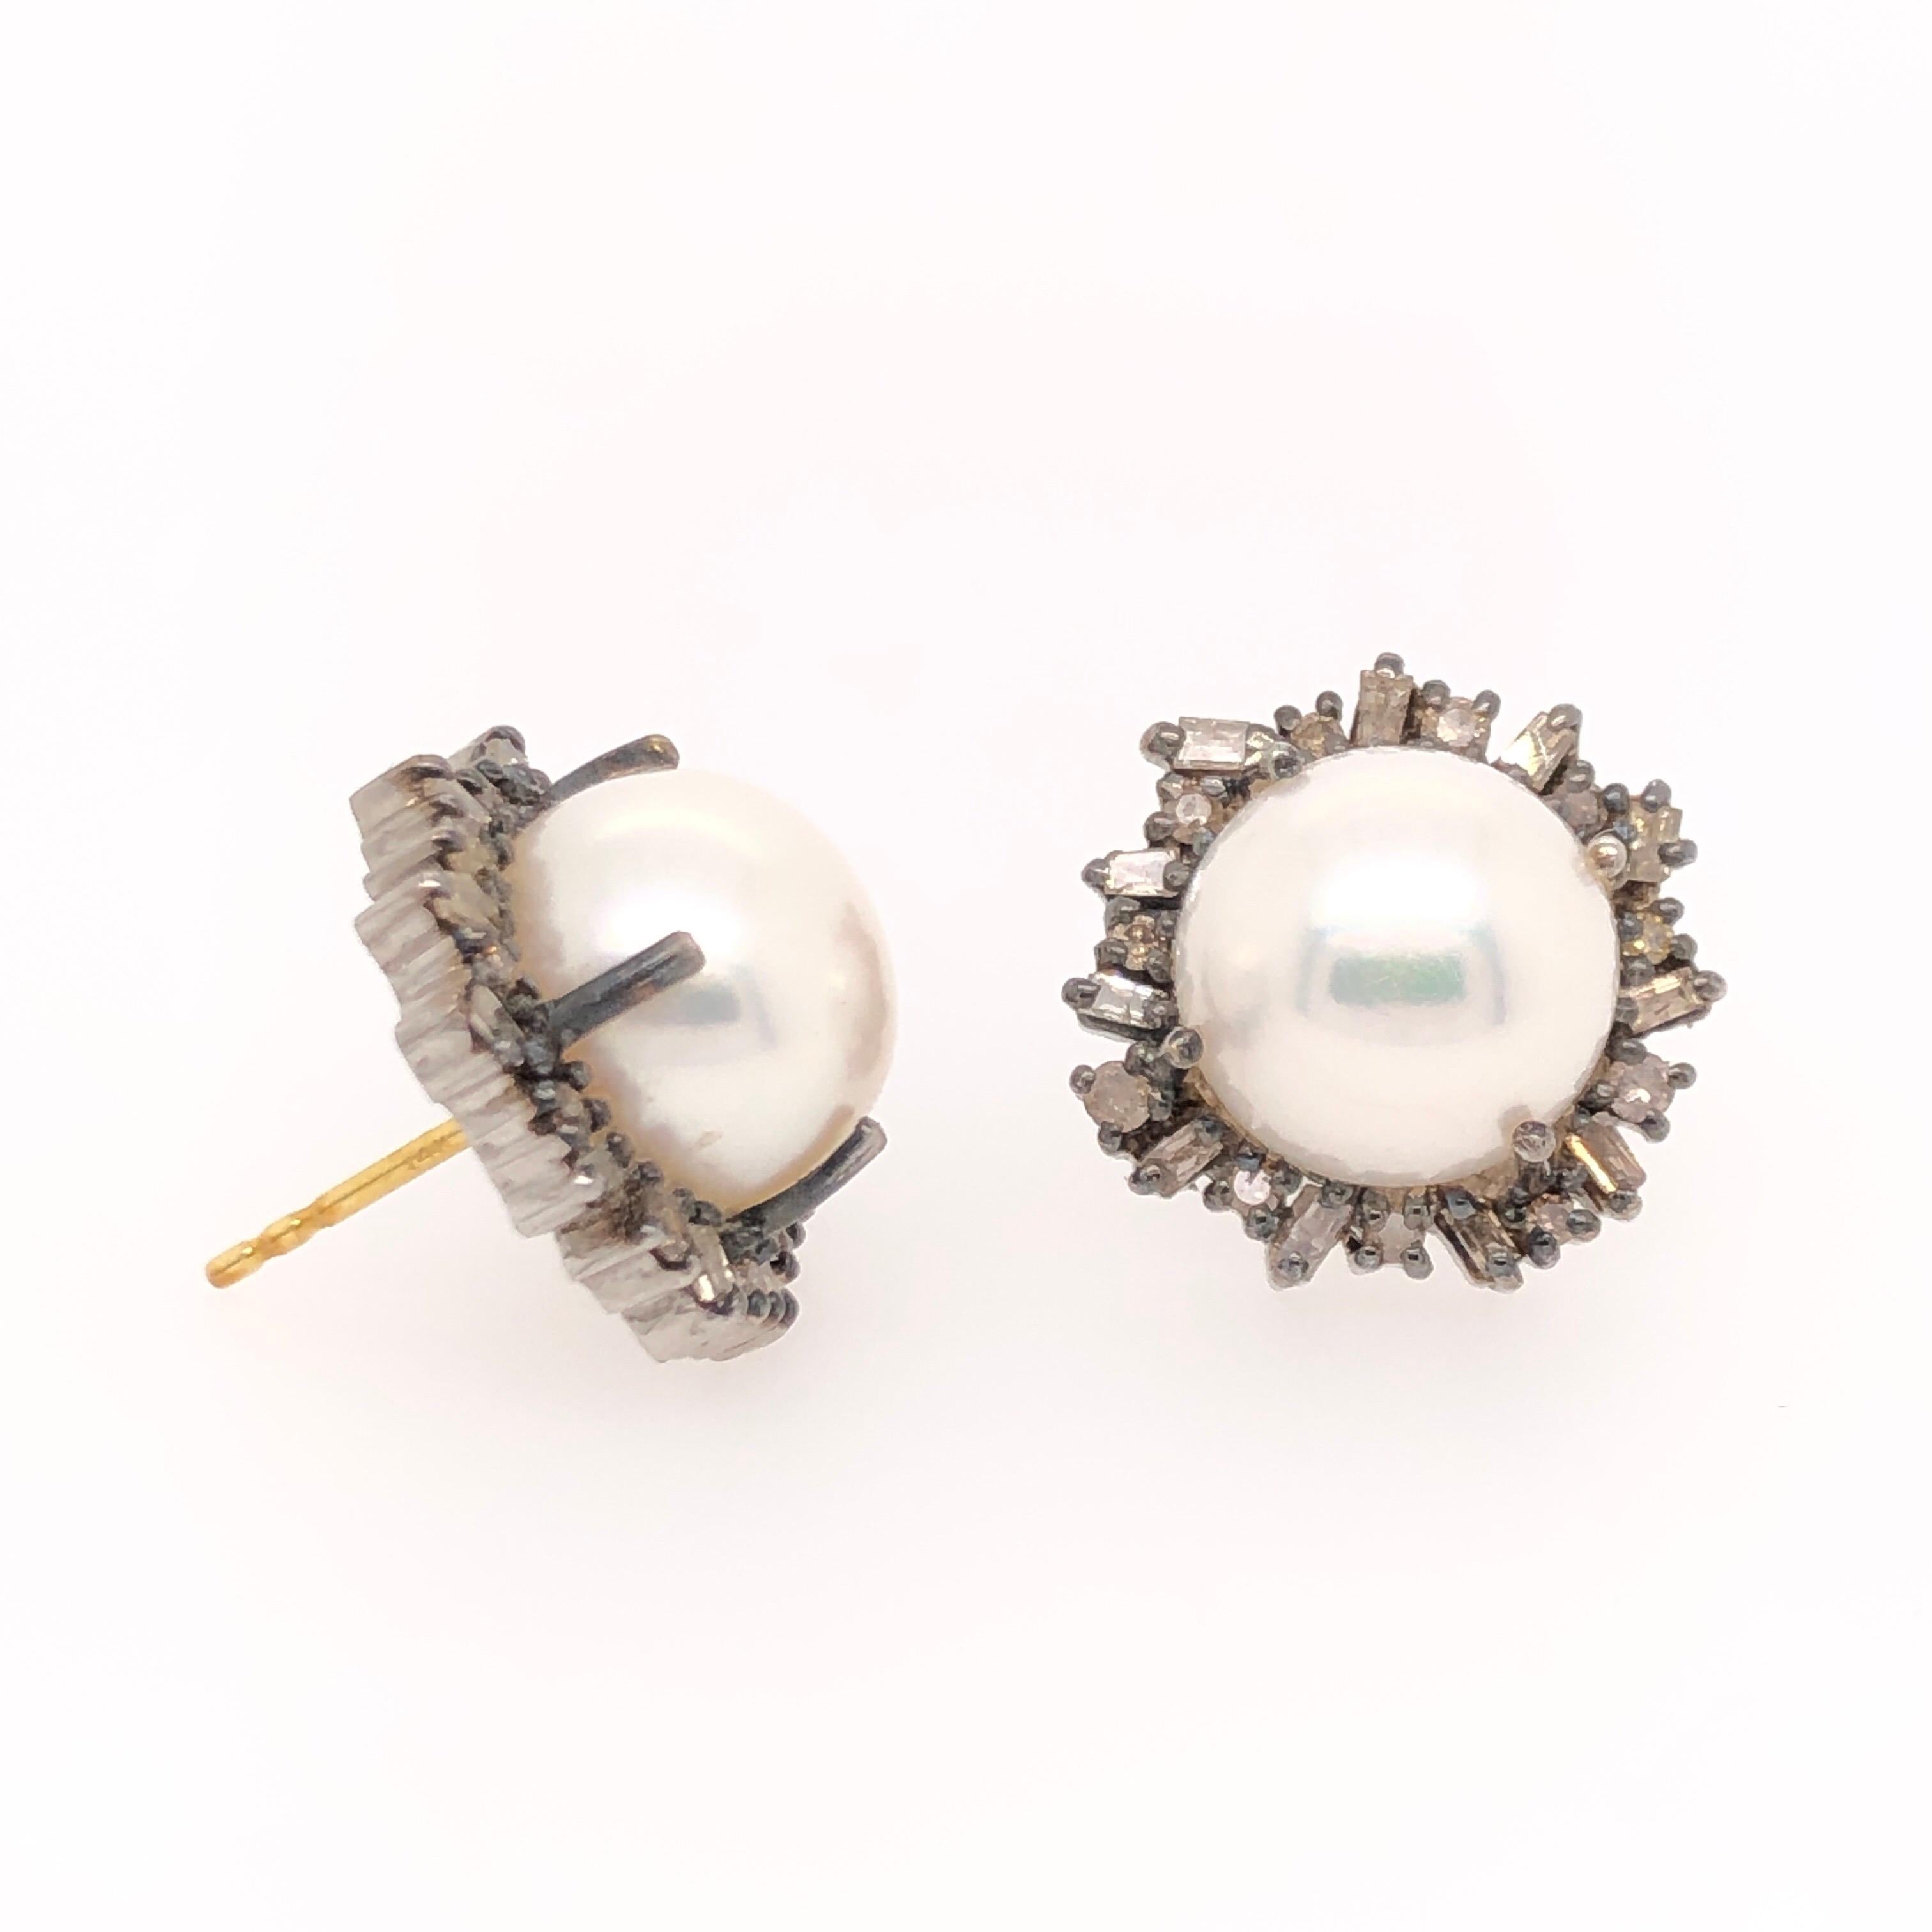 Vincent Peach's Episodic Weekender fresh water pearl and diamond earrings can easily transfer from your favorite white t-shirt and jeans to a night on the town. Fun irregular starburst design of a total of 0.62 CTS of diamonds encircle the two 10mm